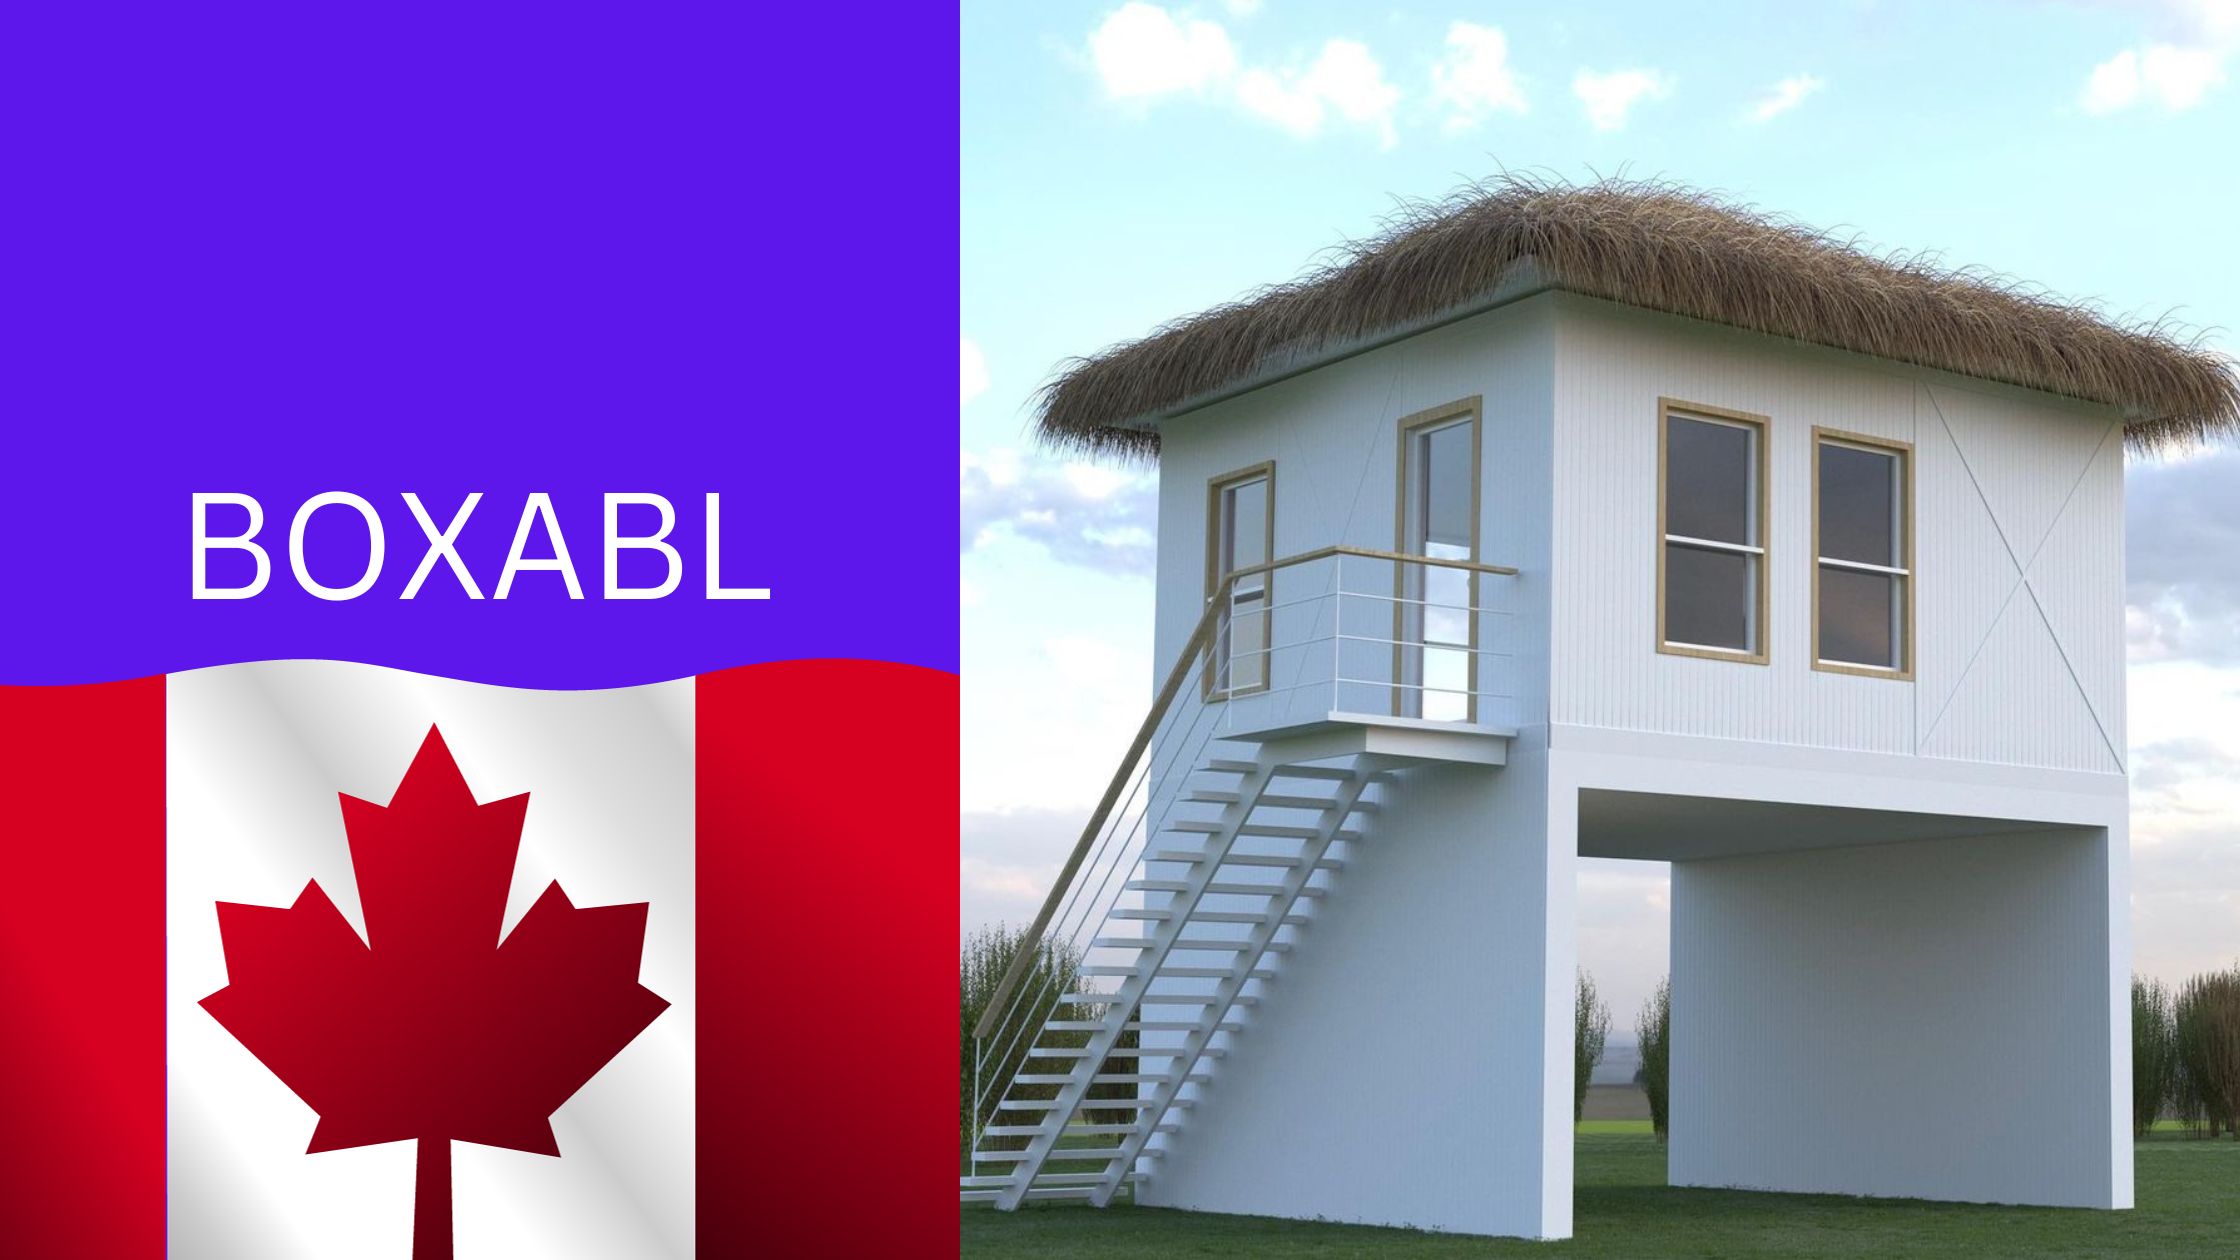 is boxable available in canada, can i get boxabl in canada, when will boxabl be available in canada, does boxabl ship to canada?, how much does boxabl house cost in canada, boabl canada price